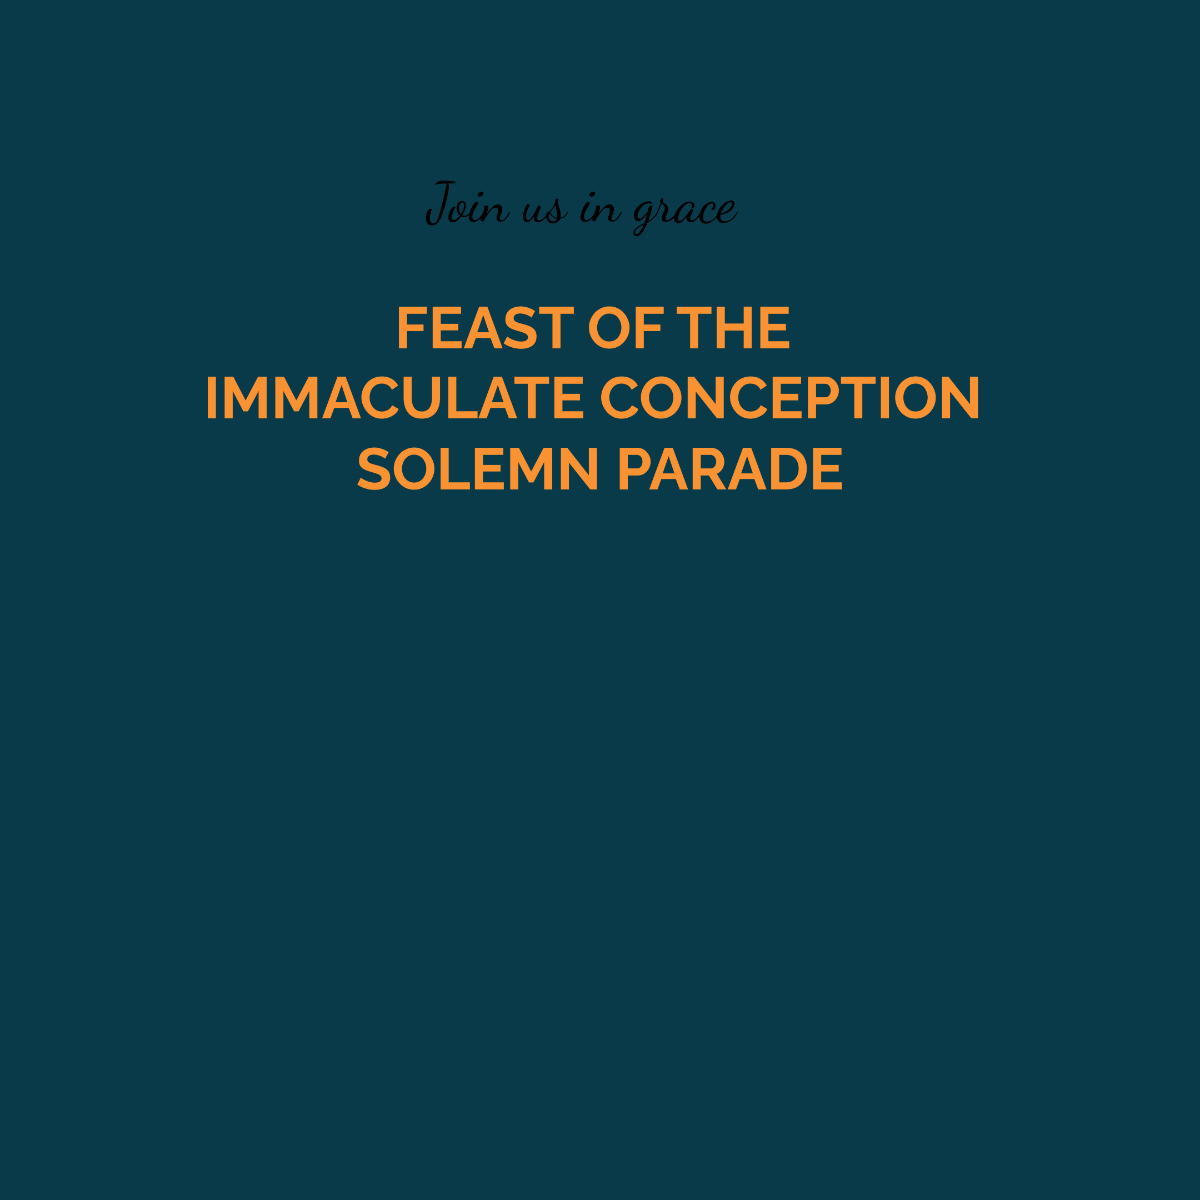 Free Feast of the Immaculate Conception Instagram Post Template